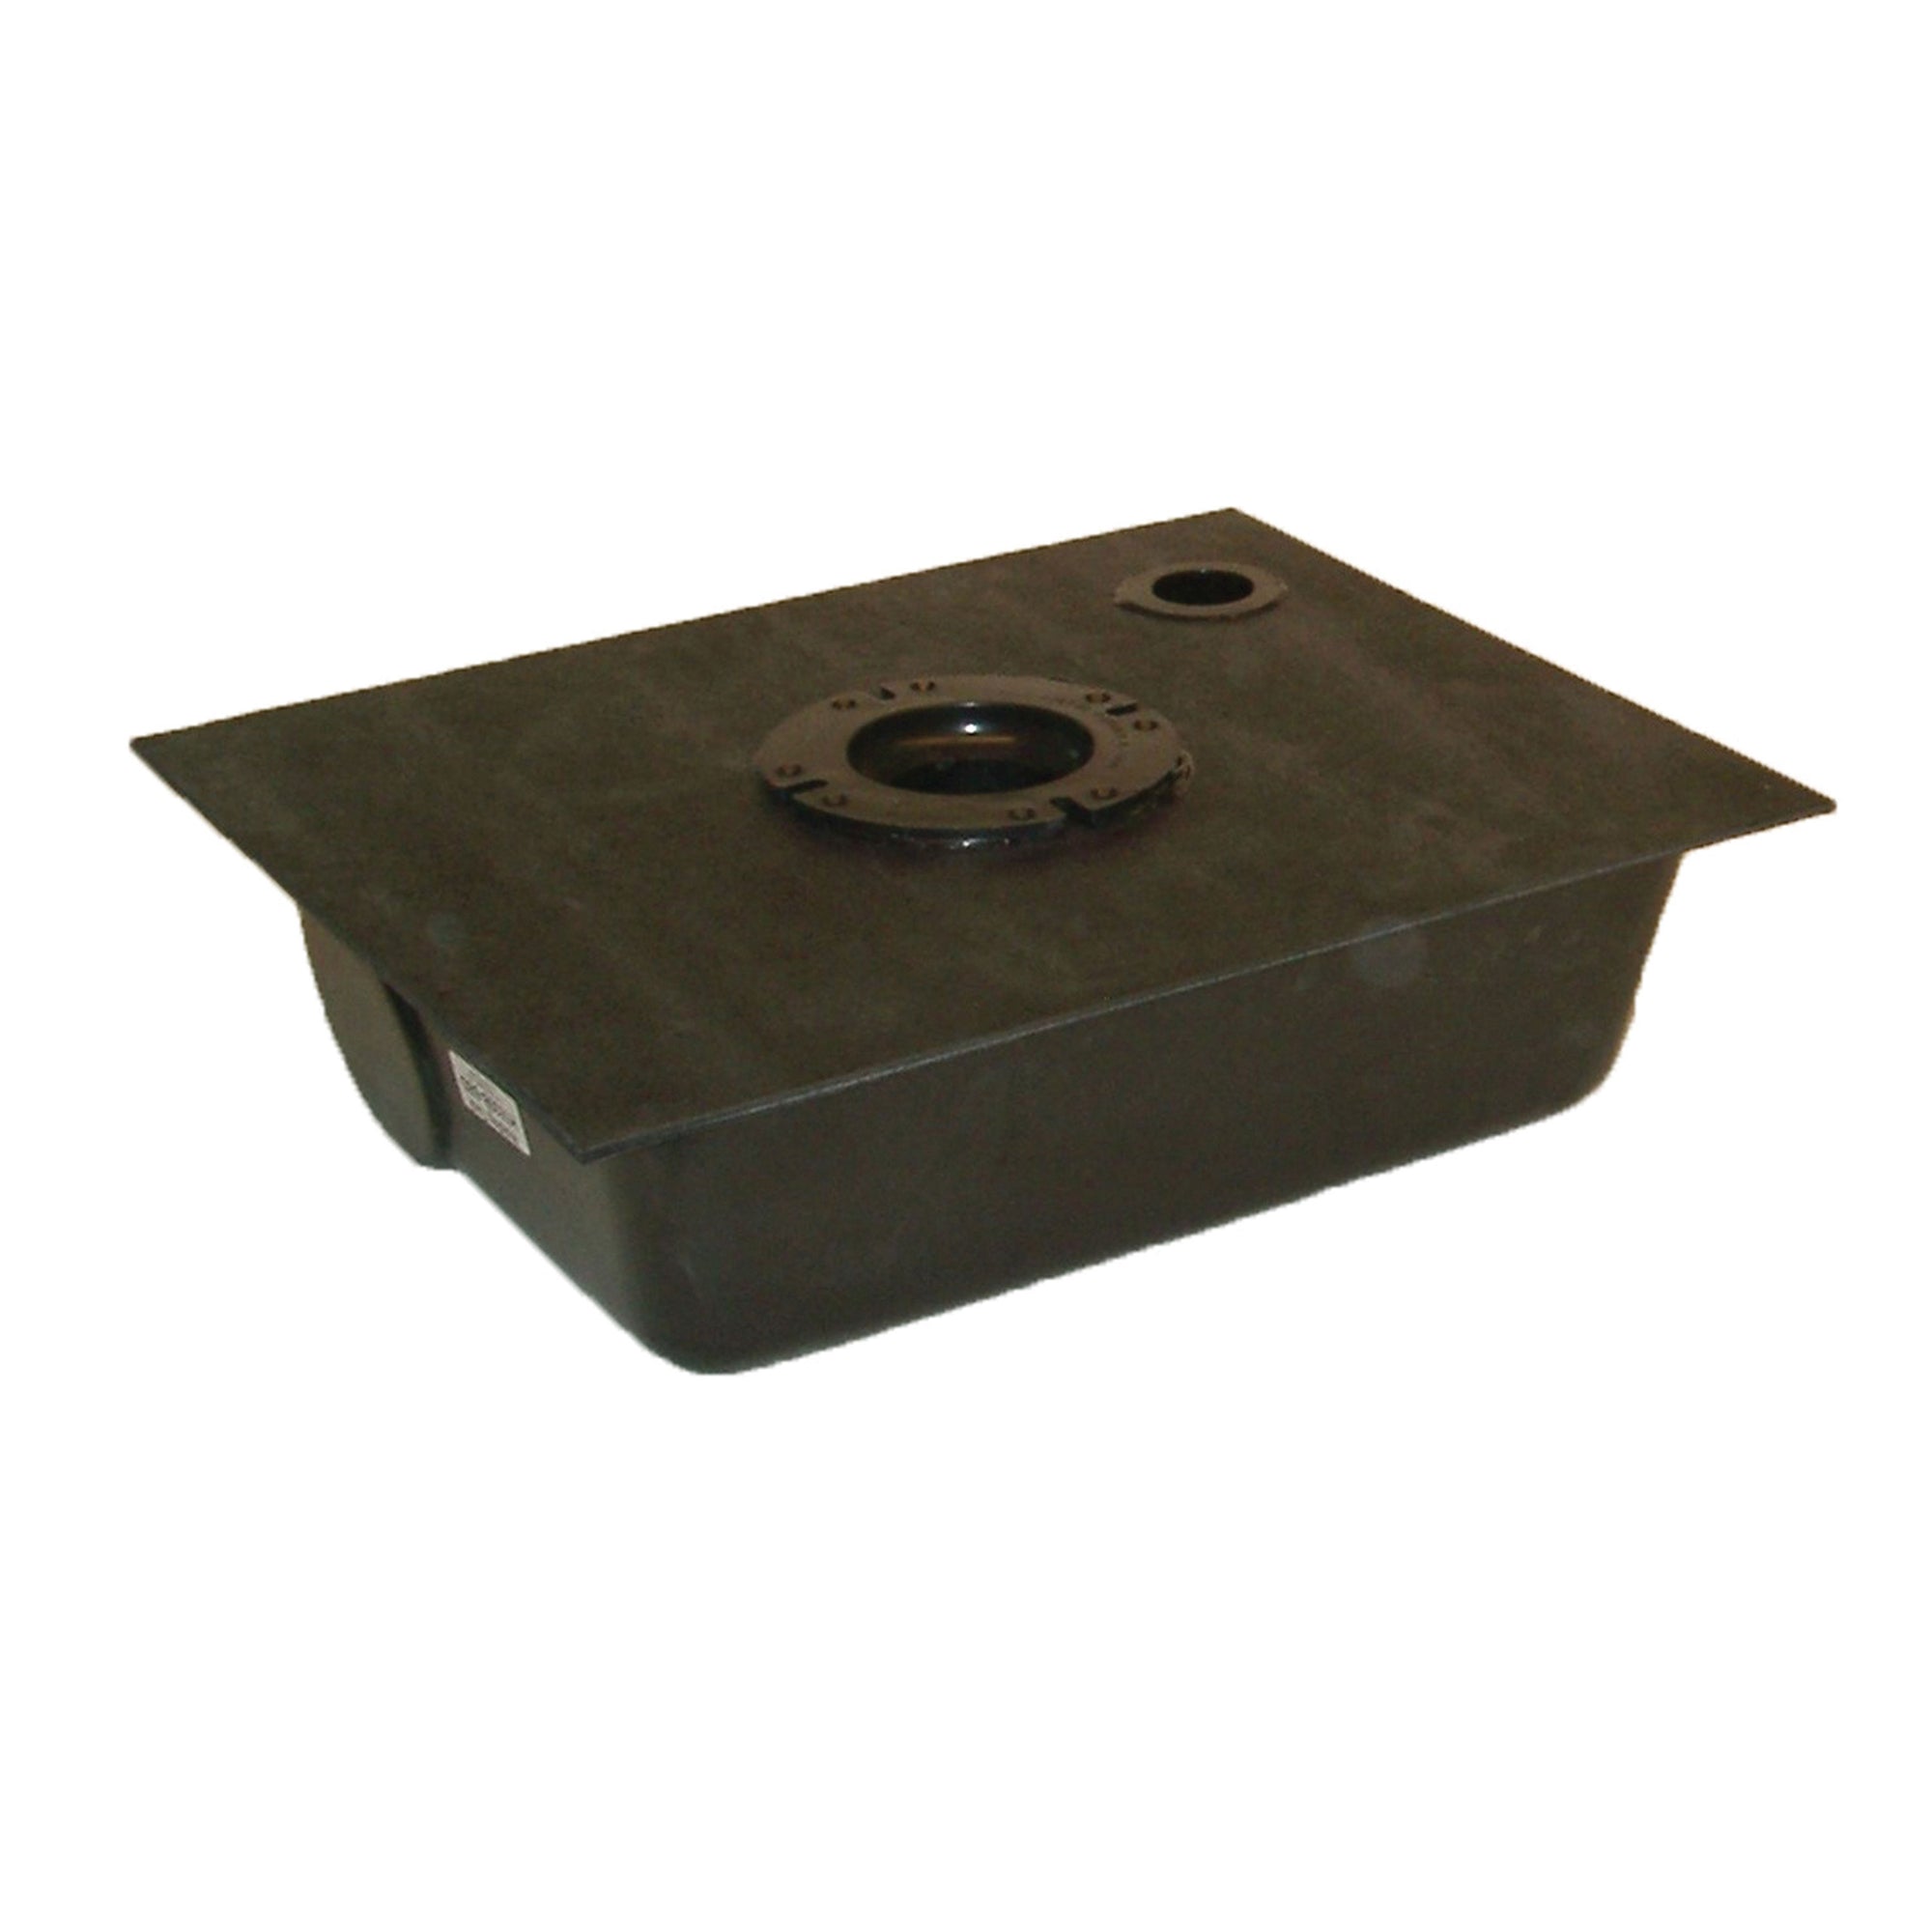 Icon 00437 Holding Tank with Bottom Drain HT630BSBD - 22.5" x 18.5" x 6"